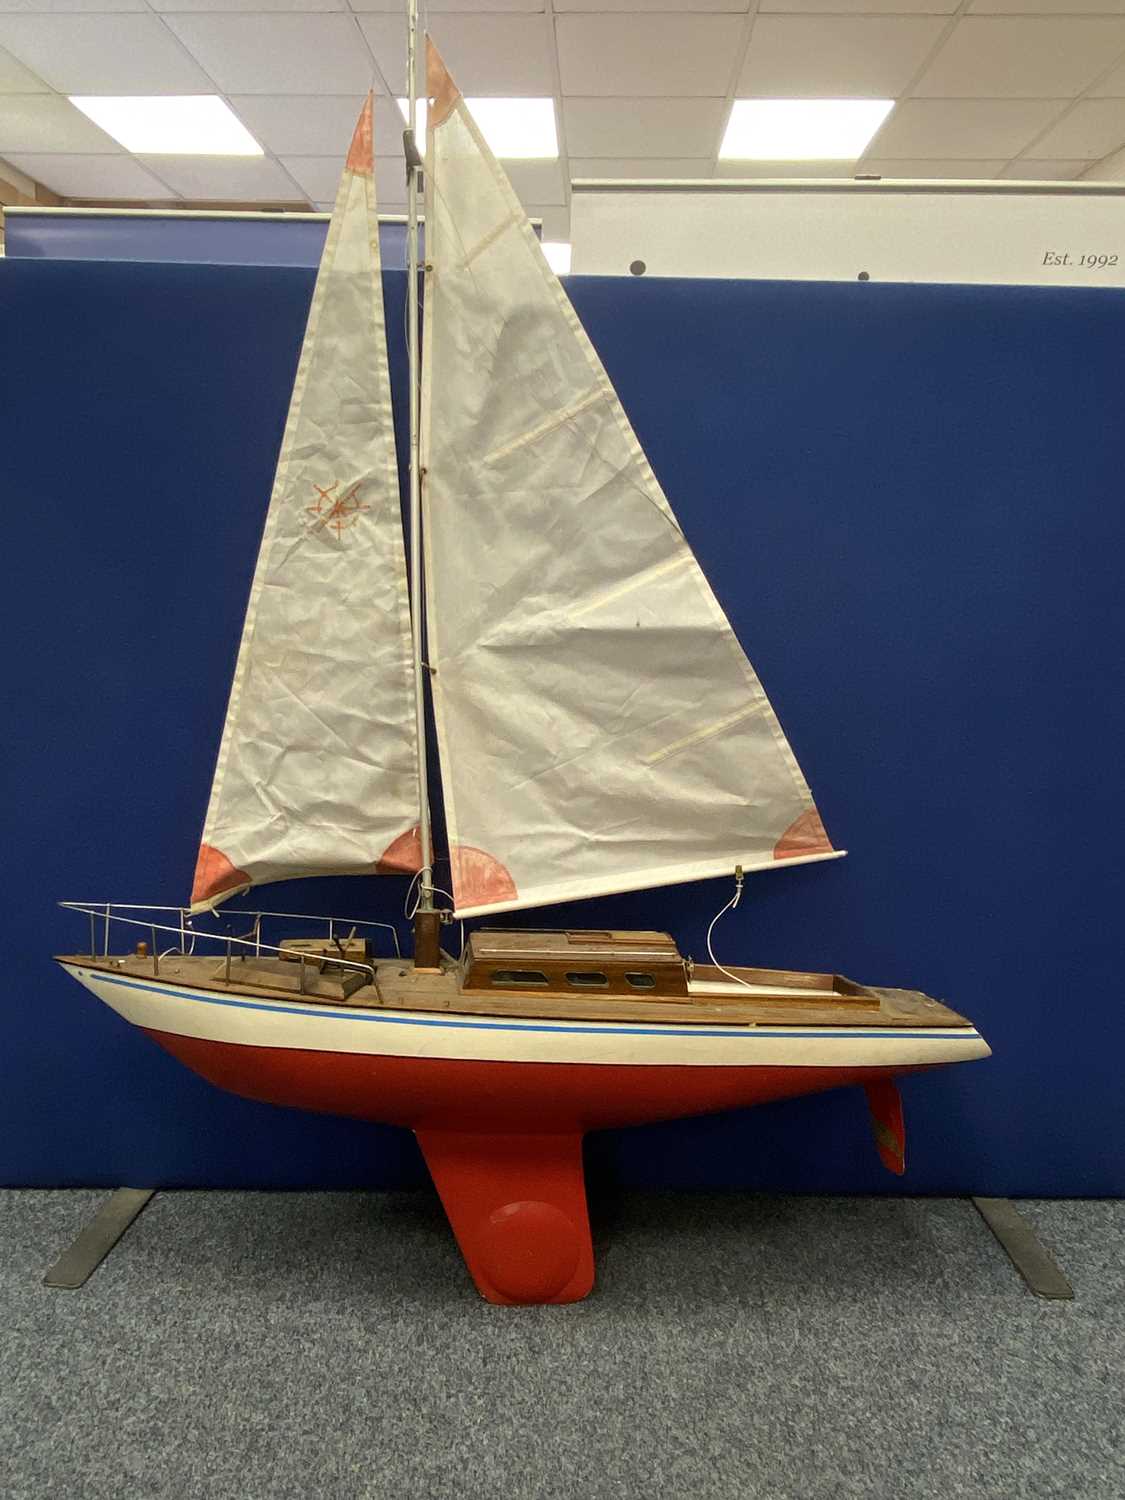 SCALE MODEL YACHT - 'Del Bach', of wooden construction, with cream and red hull, red weighted keel